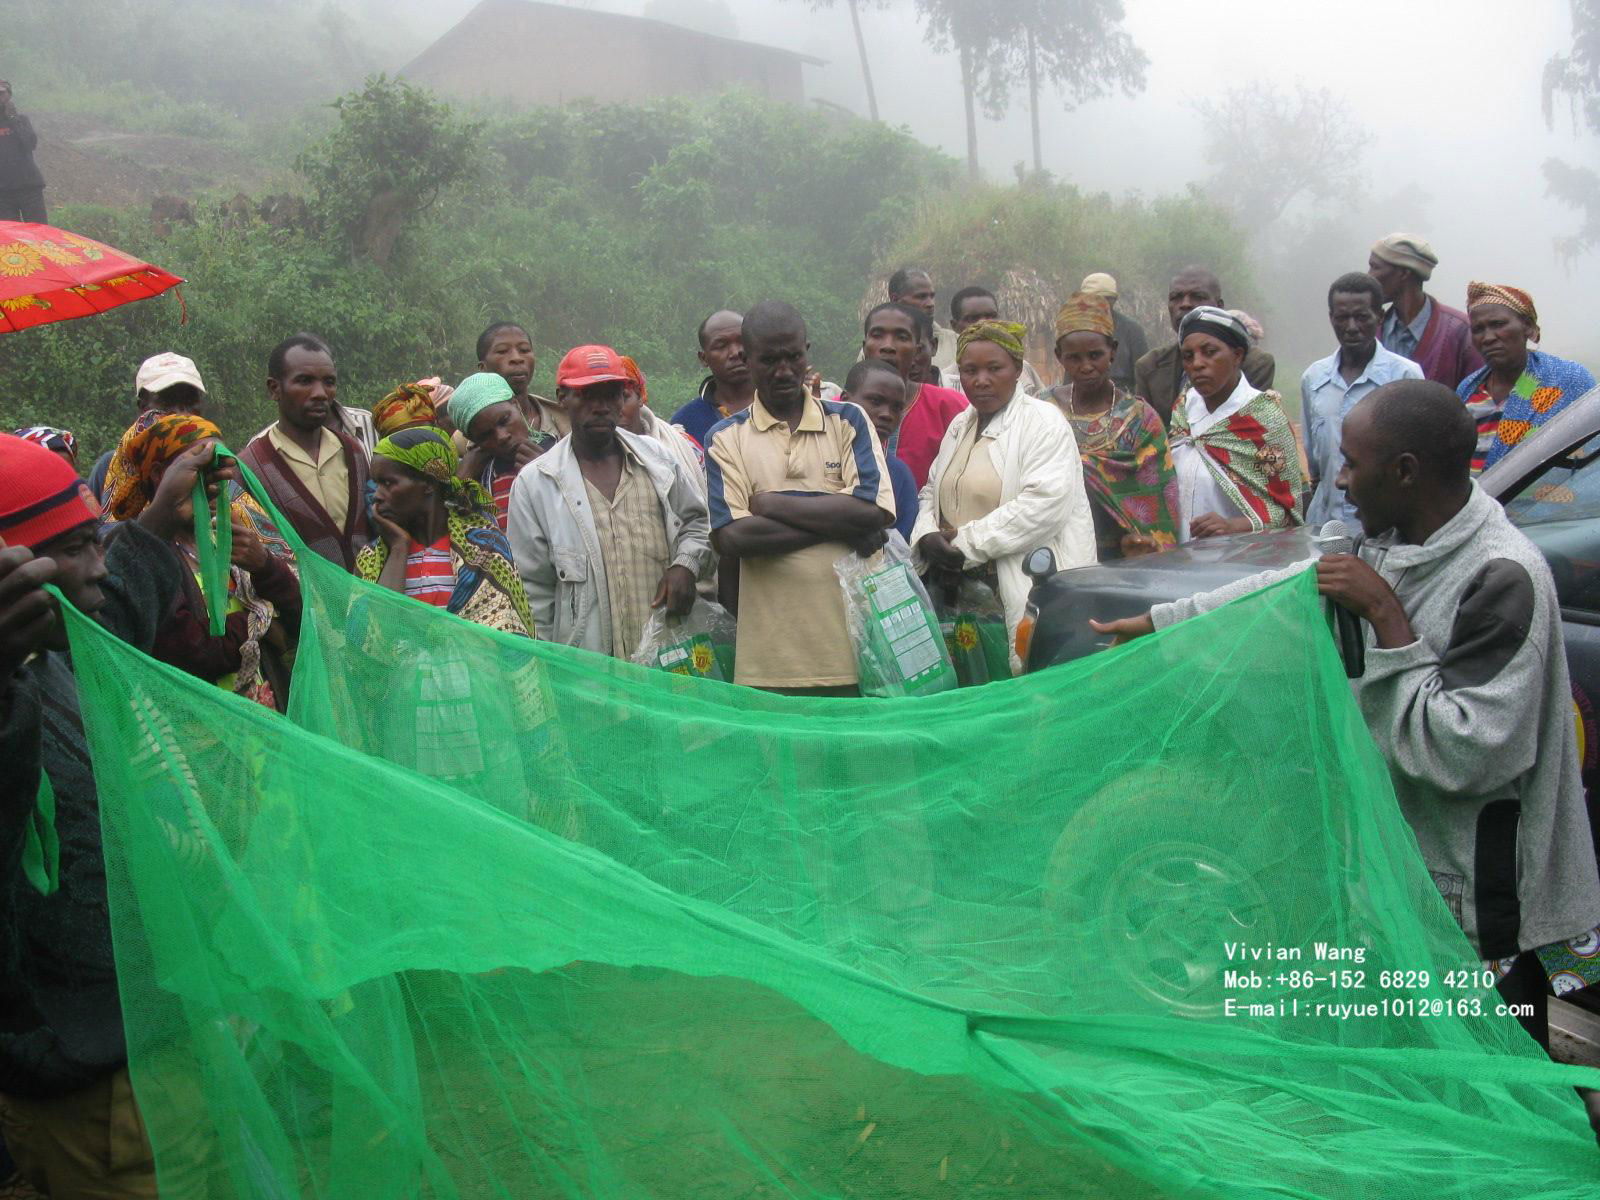 conical mosquito nets/triangle mosquito nets/treated mosquito nets/LLINs to Afri 2